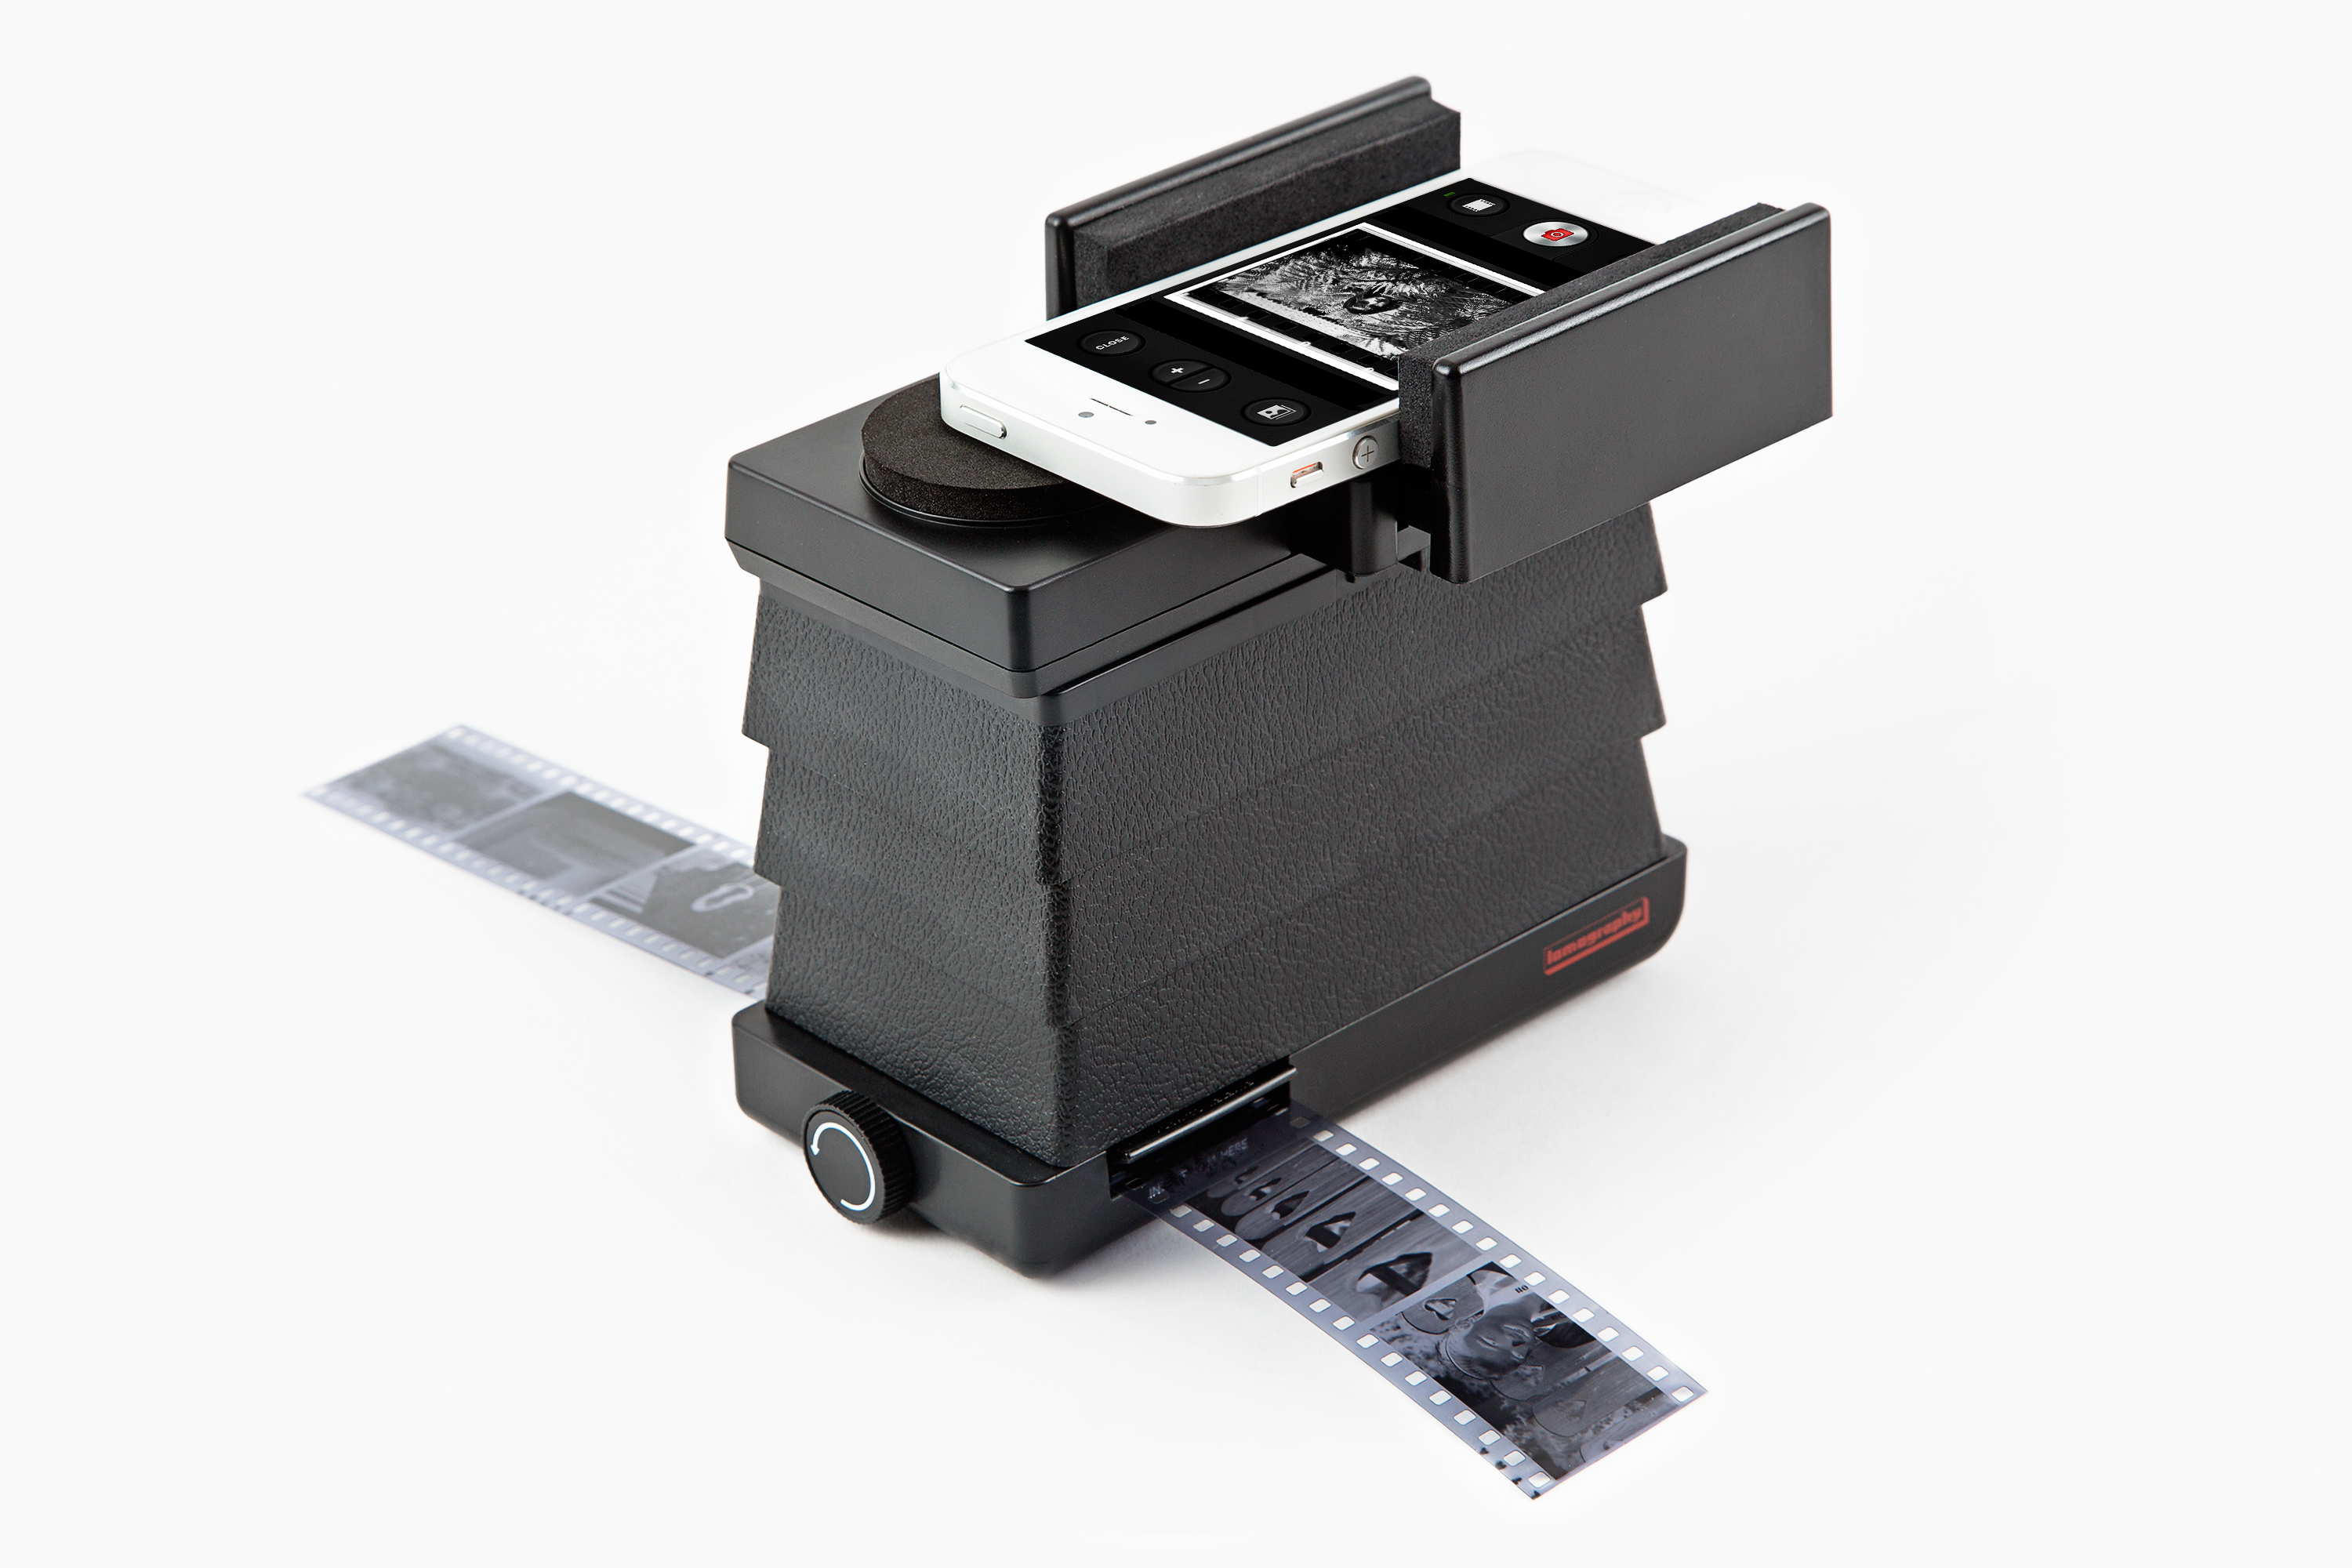 iPhone and Android Film Scanner, Oh My! 